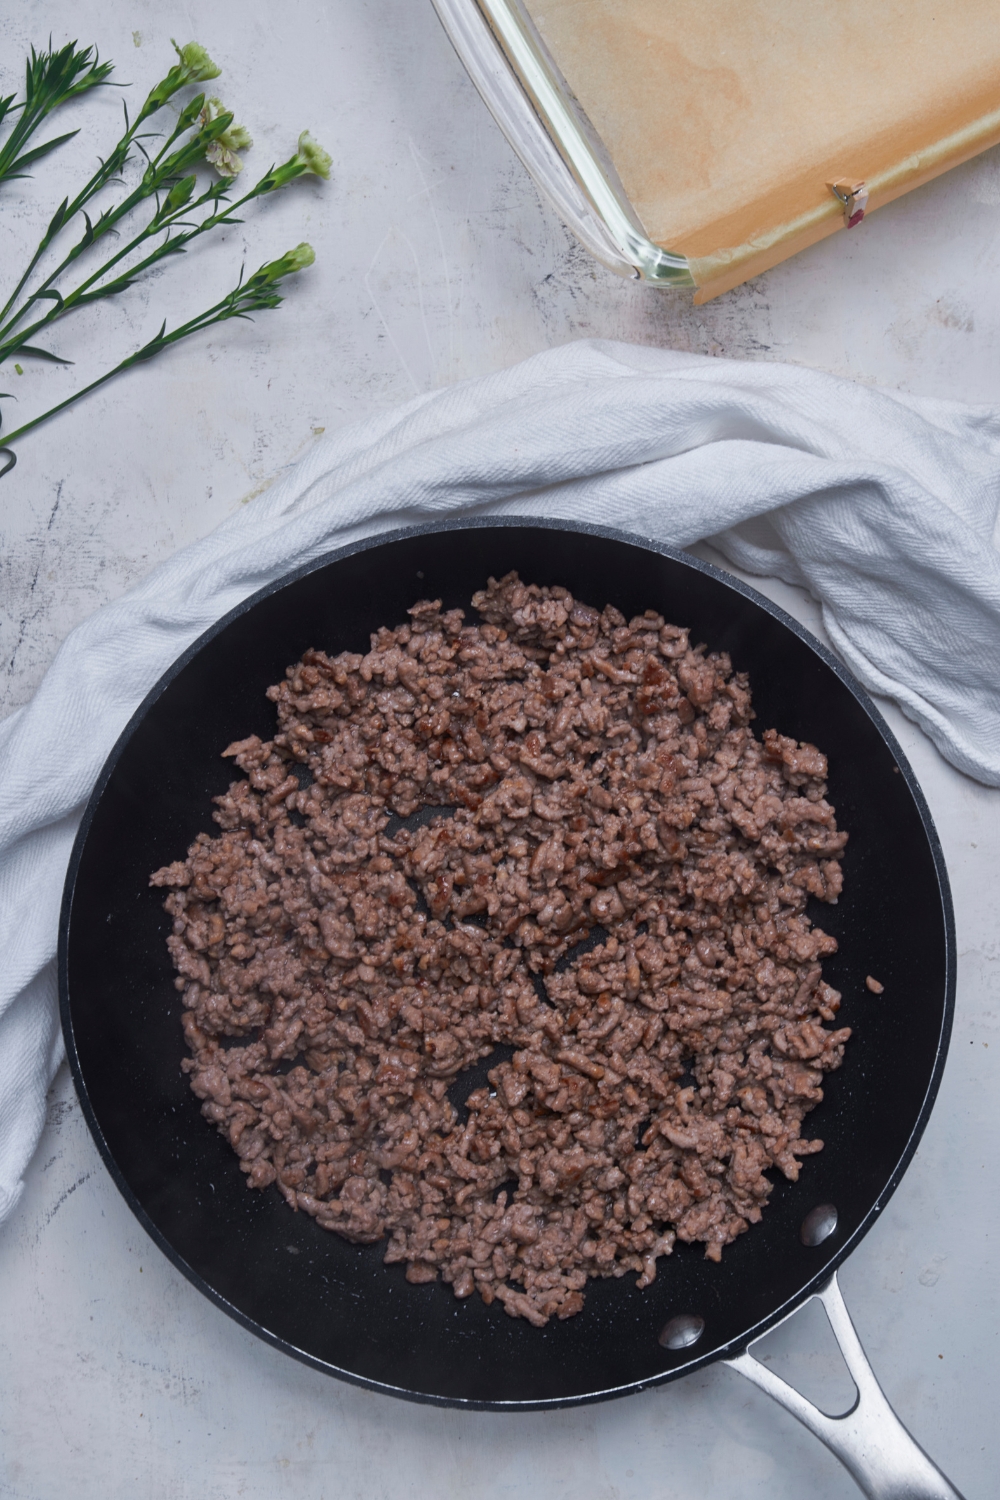 Black skillet filled with cooked ground beef.